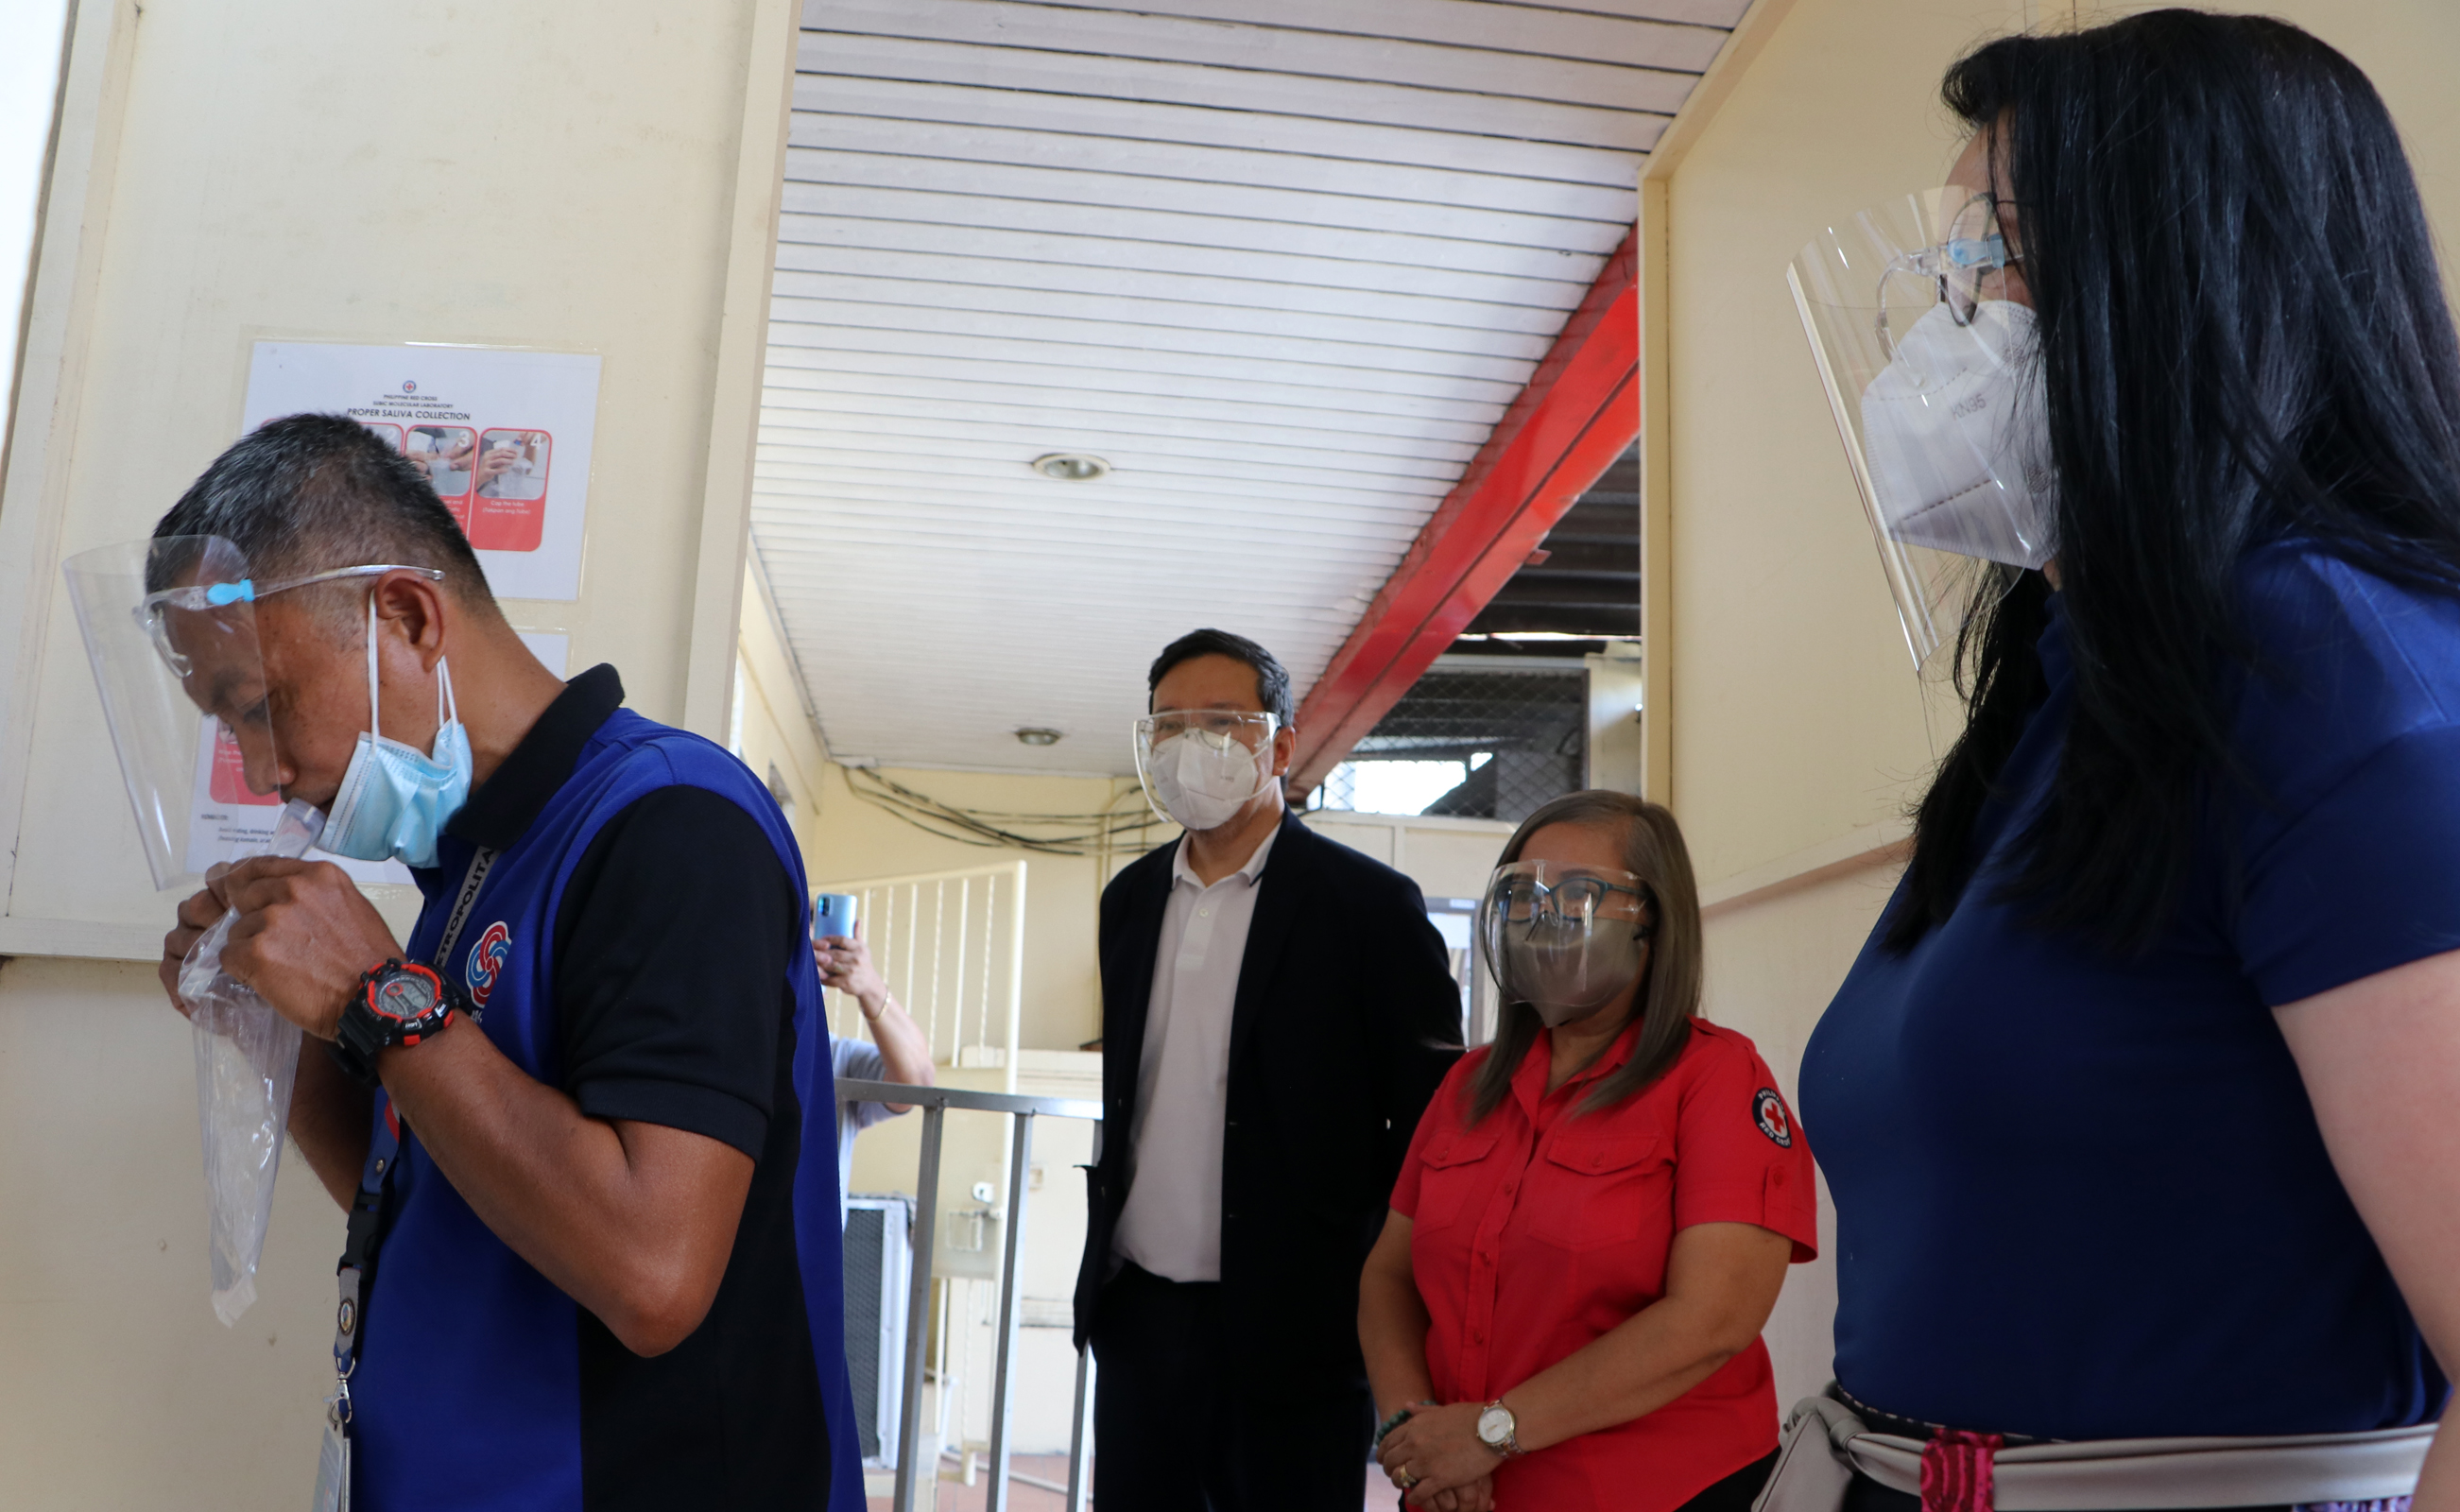 Emergency Medical Services staff Marcelo Macariola demonstrates the collection of saliva specimen forÂ testing during the launch of the saliva testing facility in Subic on Monday. Also in photo are SBMA Chairman and Administrator Wilma T. Eisma, PRC-Olongapo Administrator Vilma T. Feji, and SBMA Deputy Administrator for Health and Safety Ronnie Yambao.